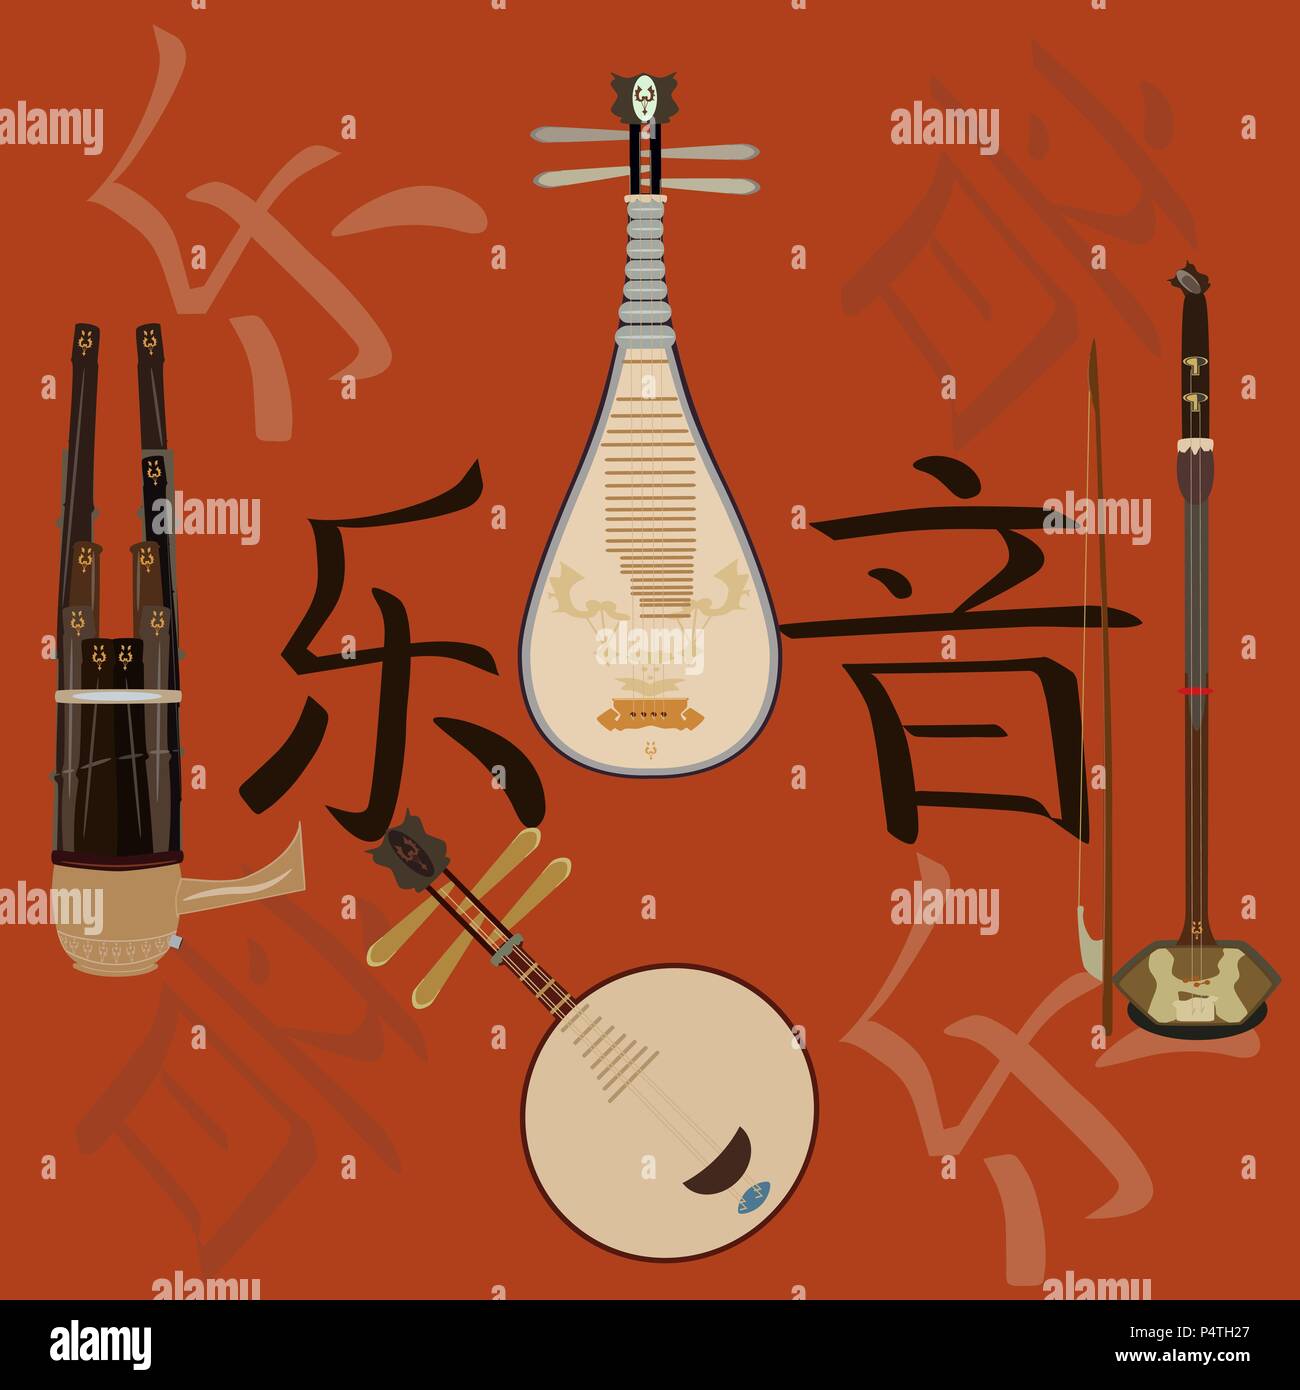 Vector Chinese Musical Instruments Hieroglyphics Stock Vector